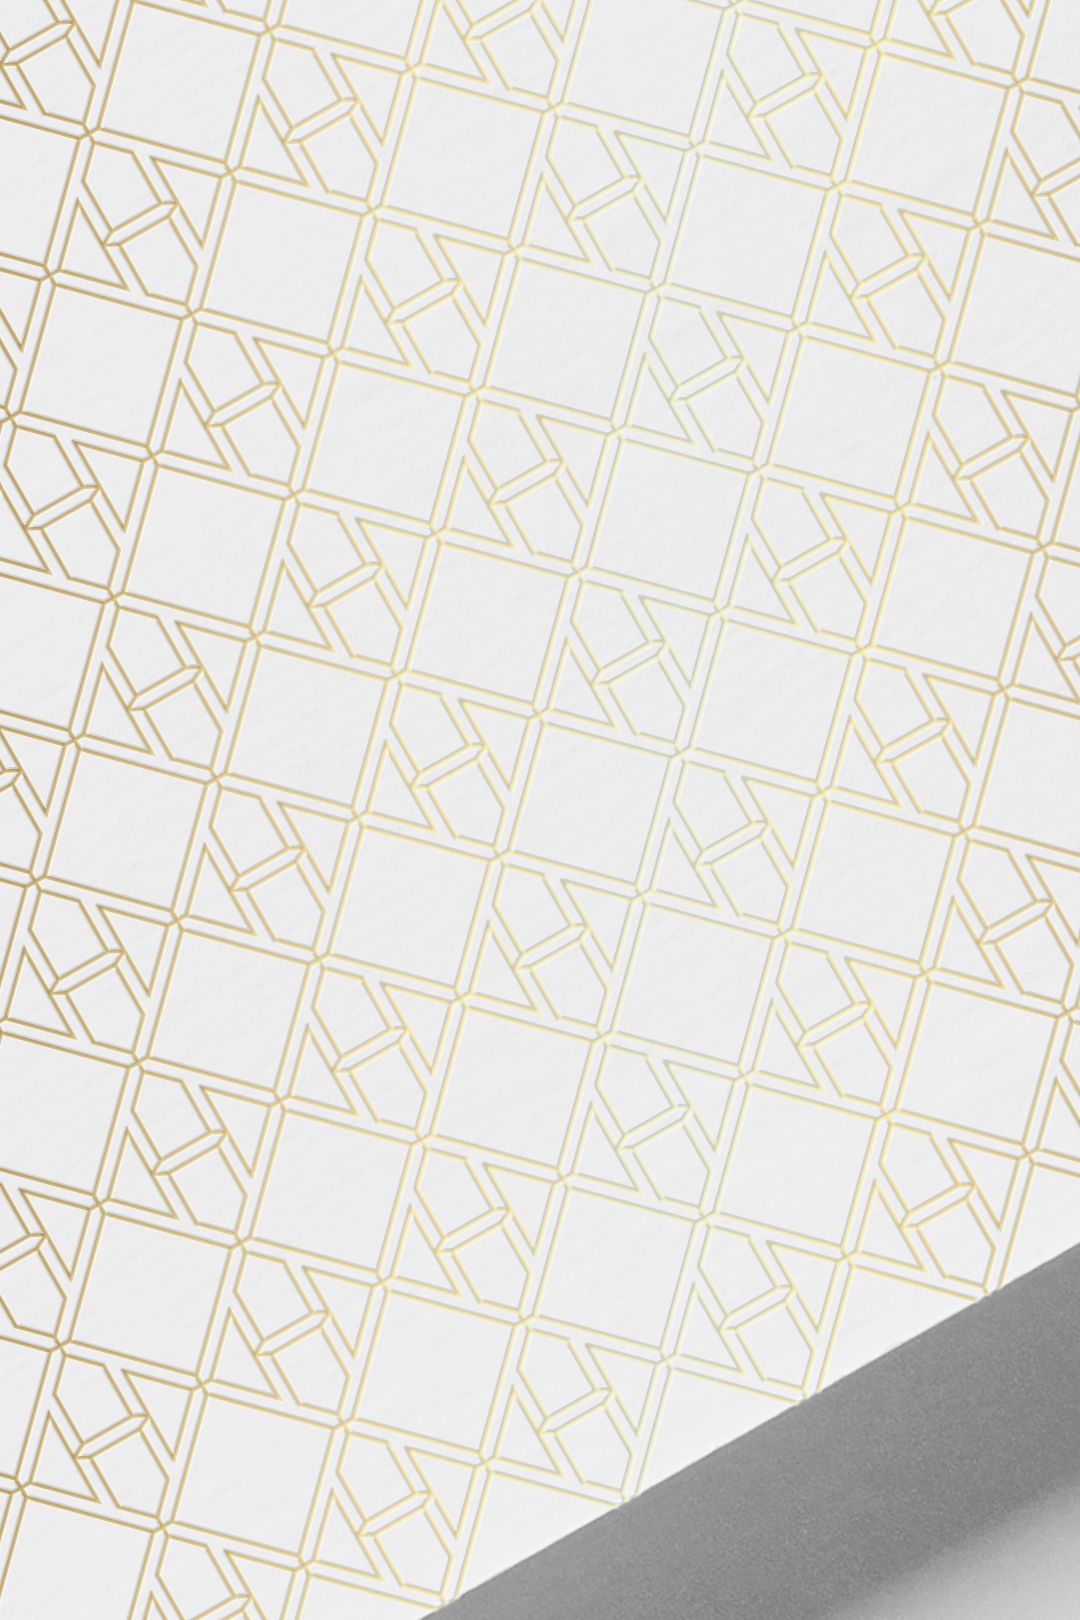 Hennessy H pattern applied in gold foil to paper